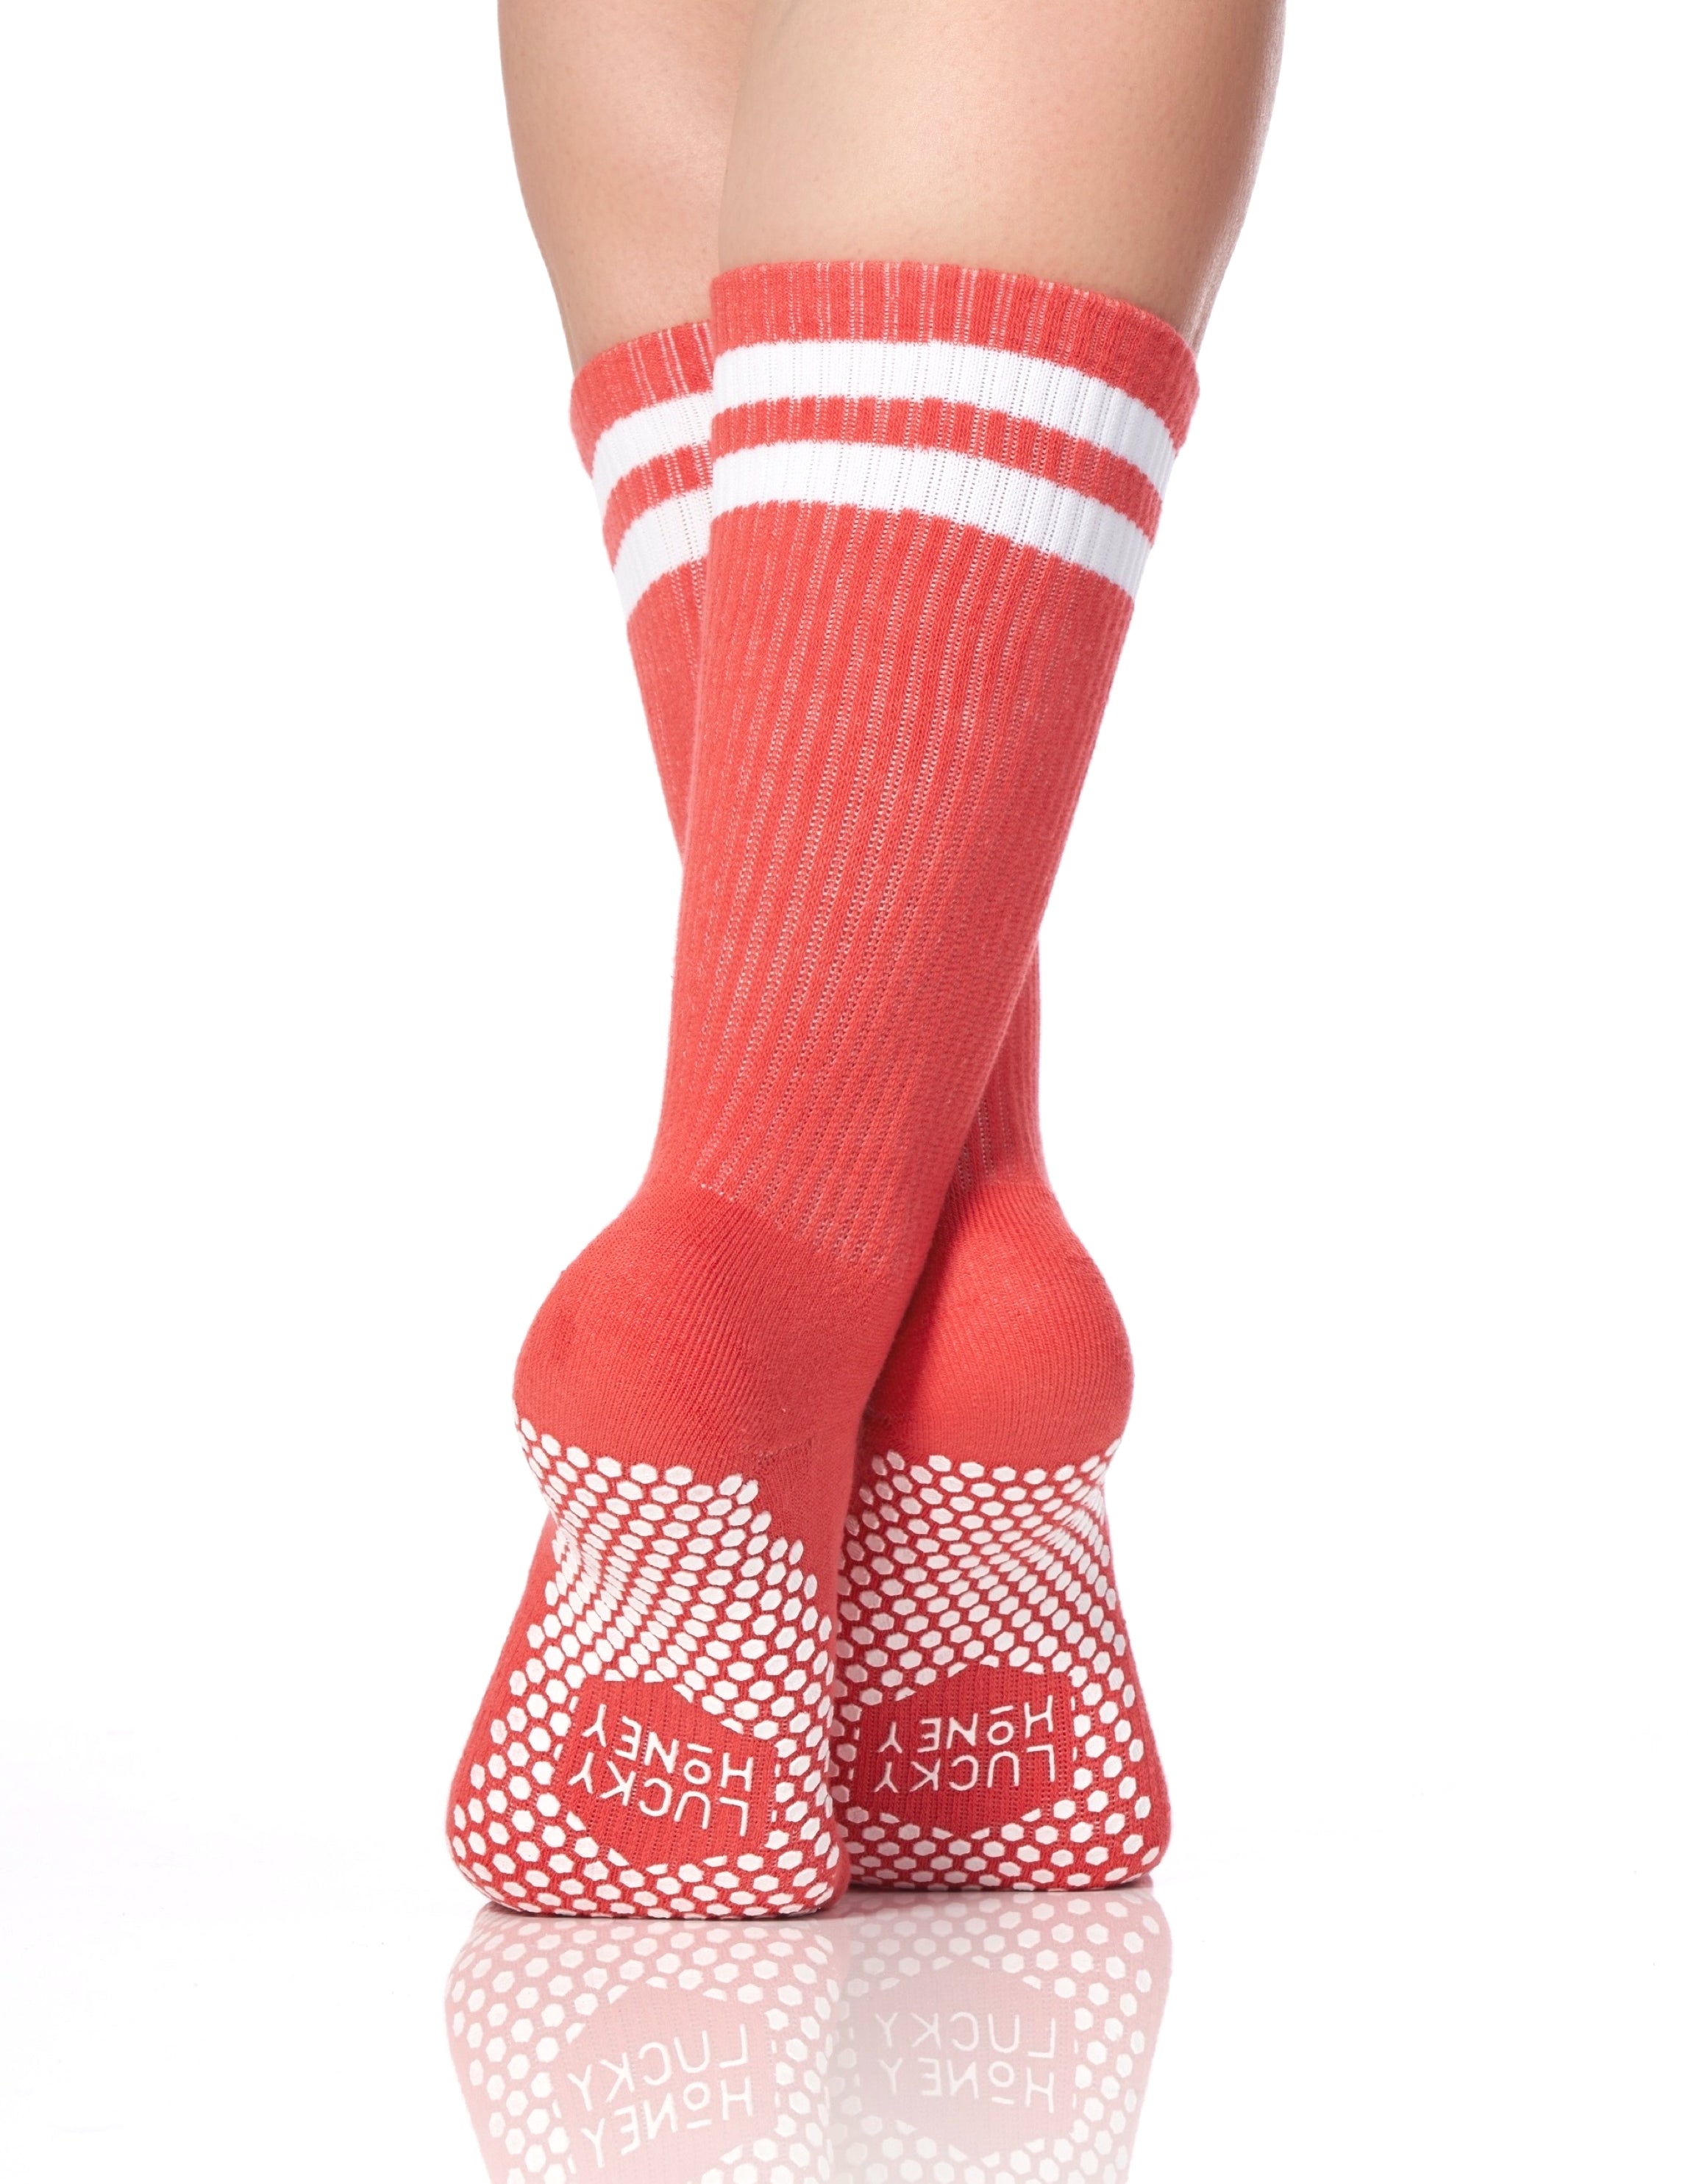 The Dad Sock Vintage Red - Lucky Honey